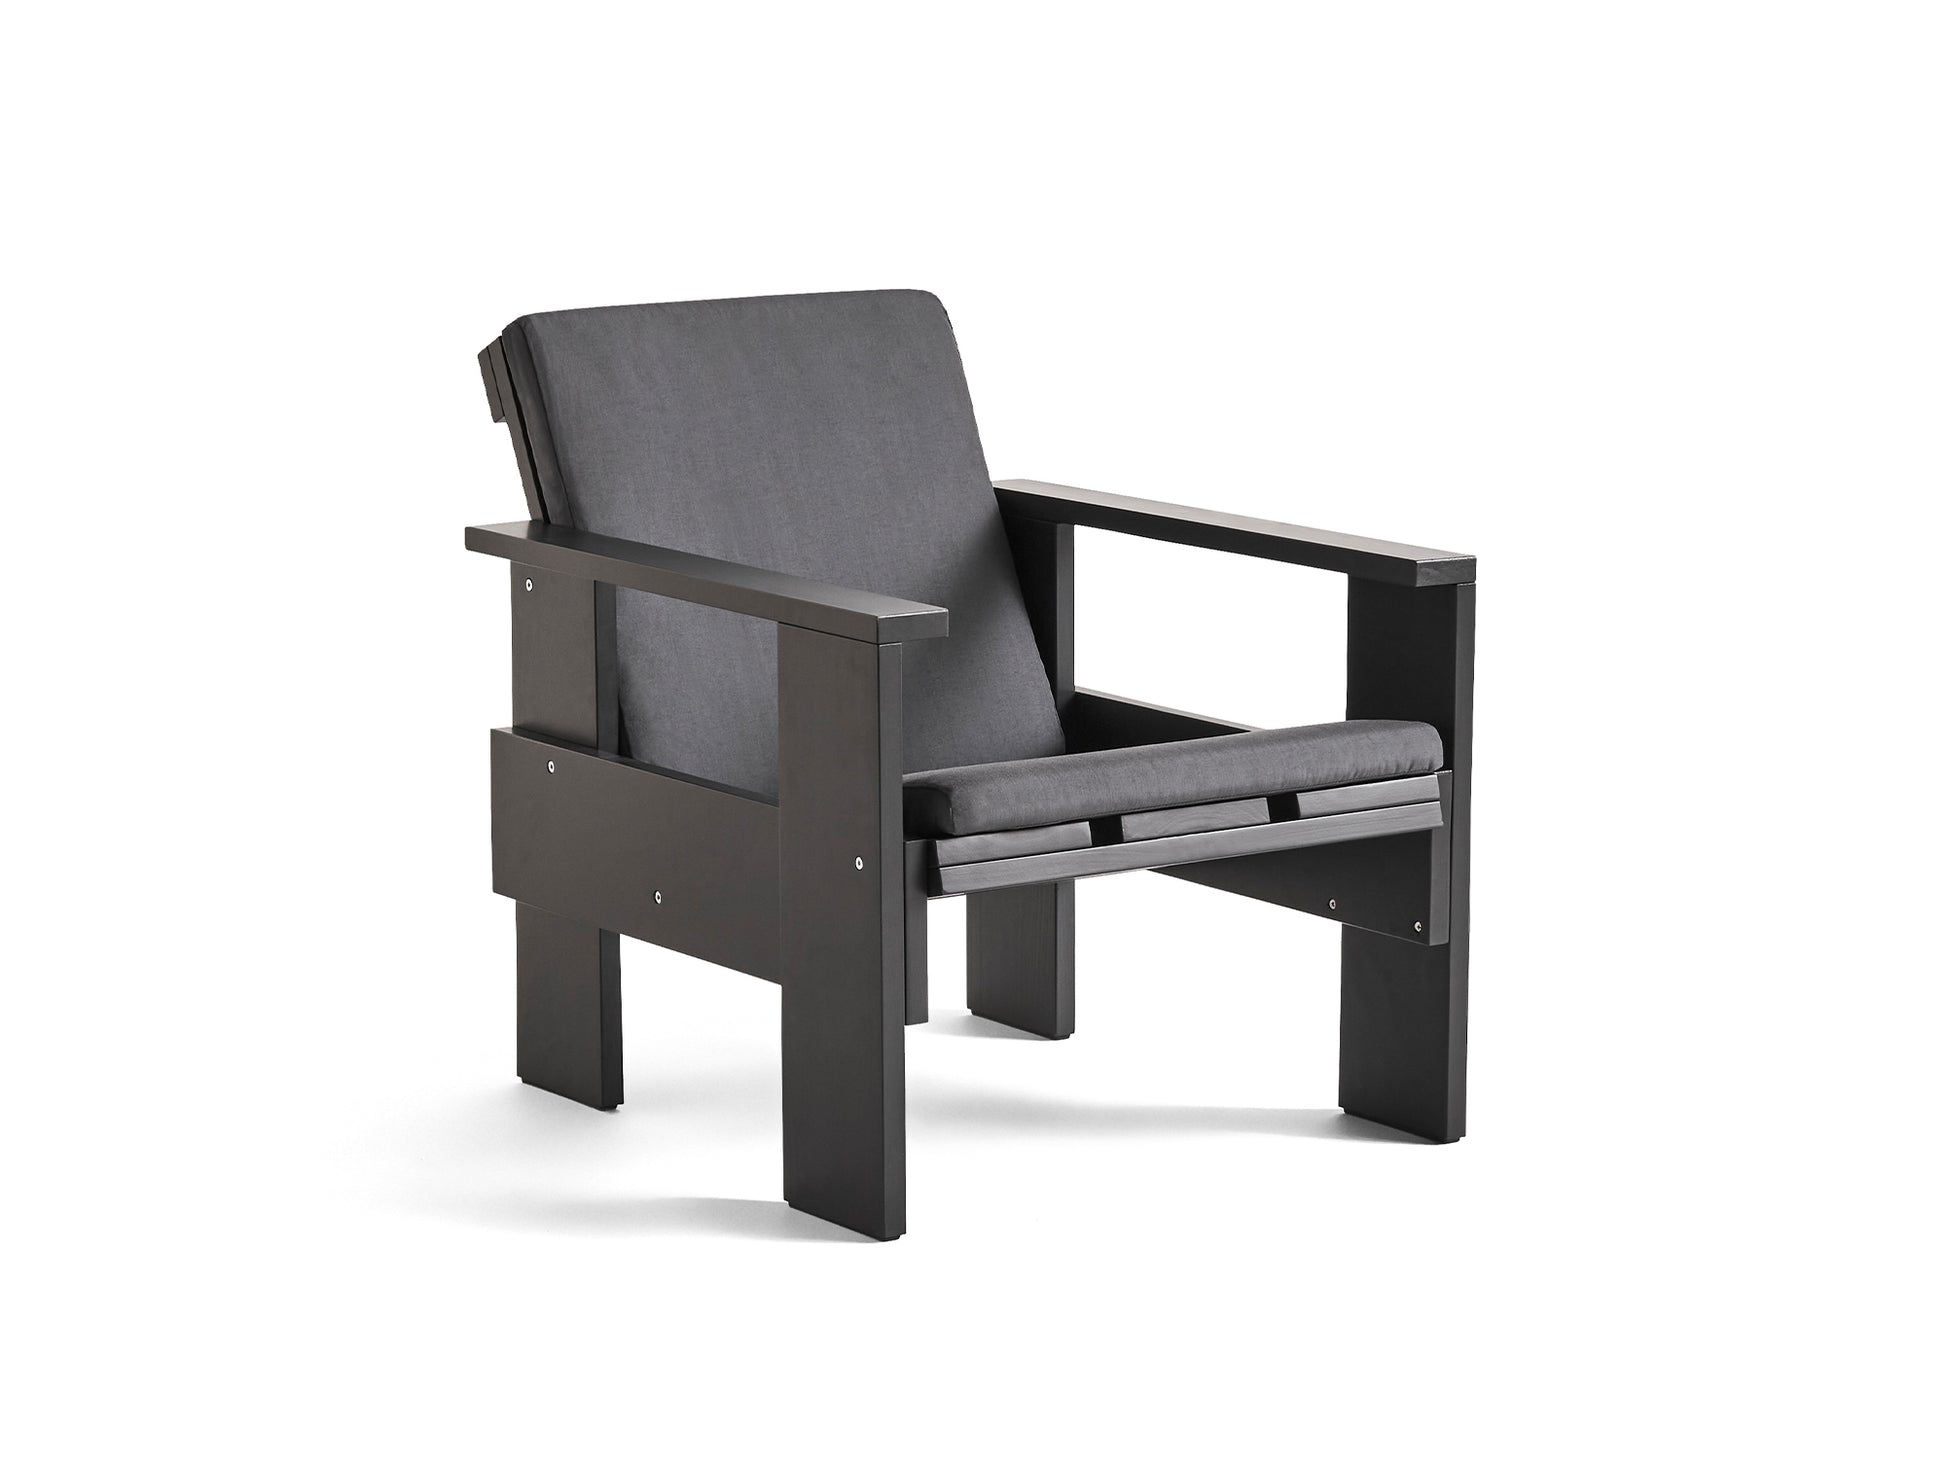 Crate Dining Chair Seat Folding Cushion by HAY - Anthracite